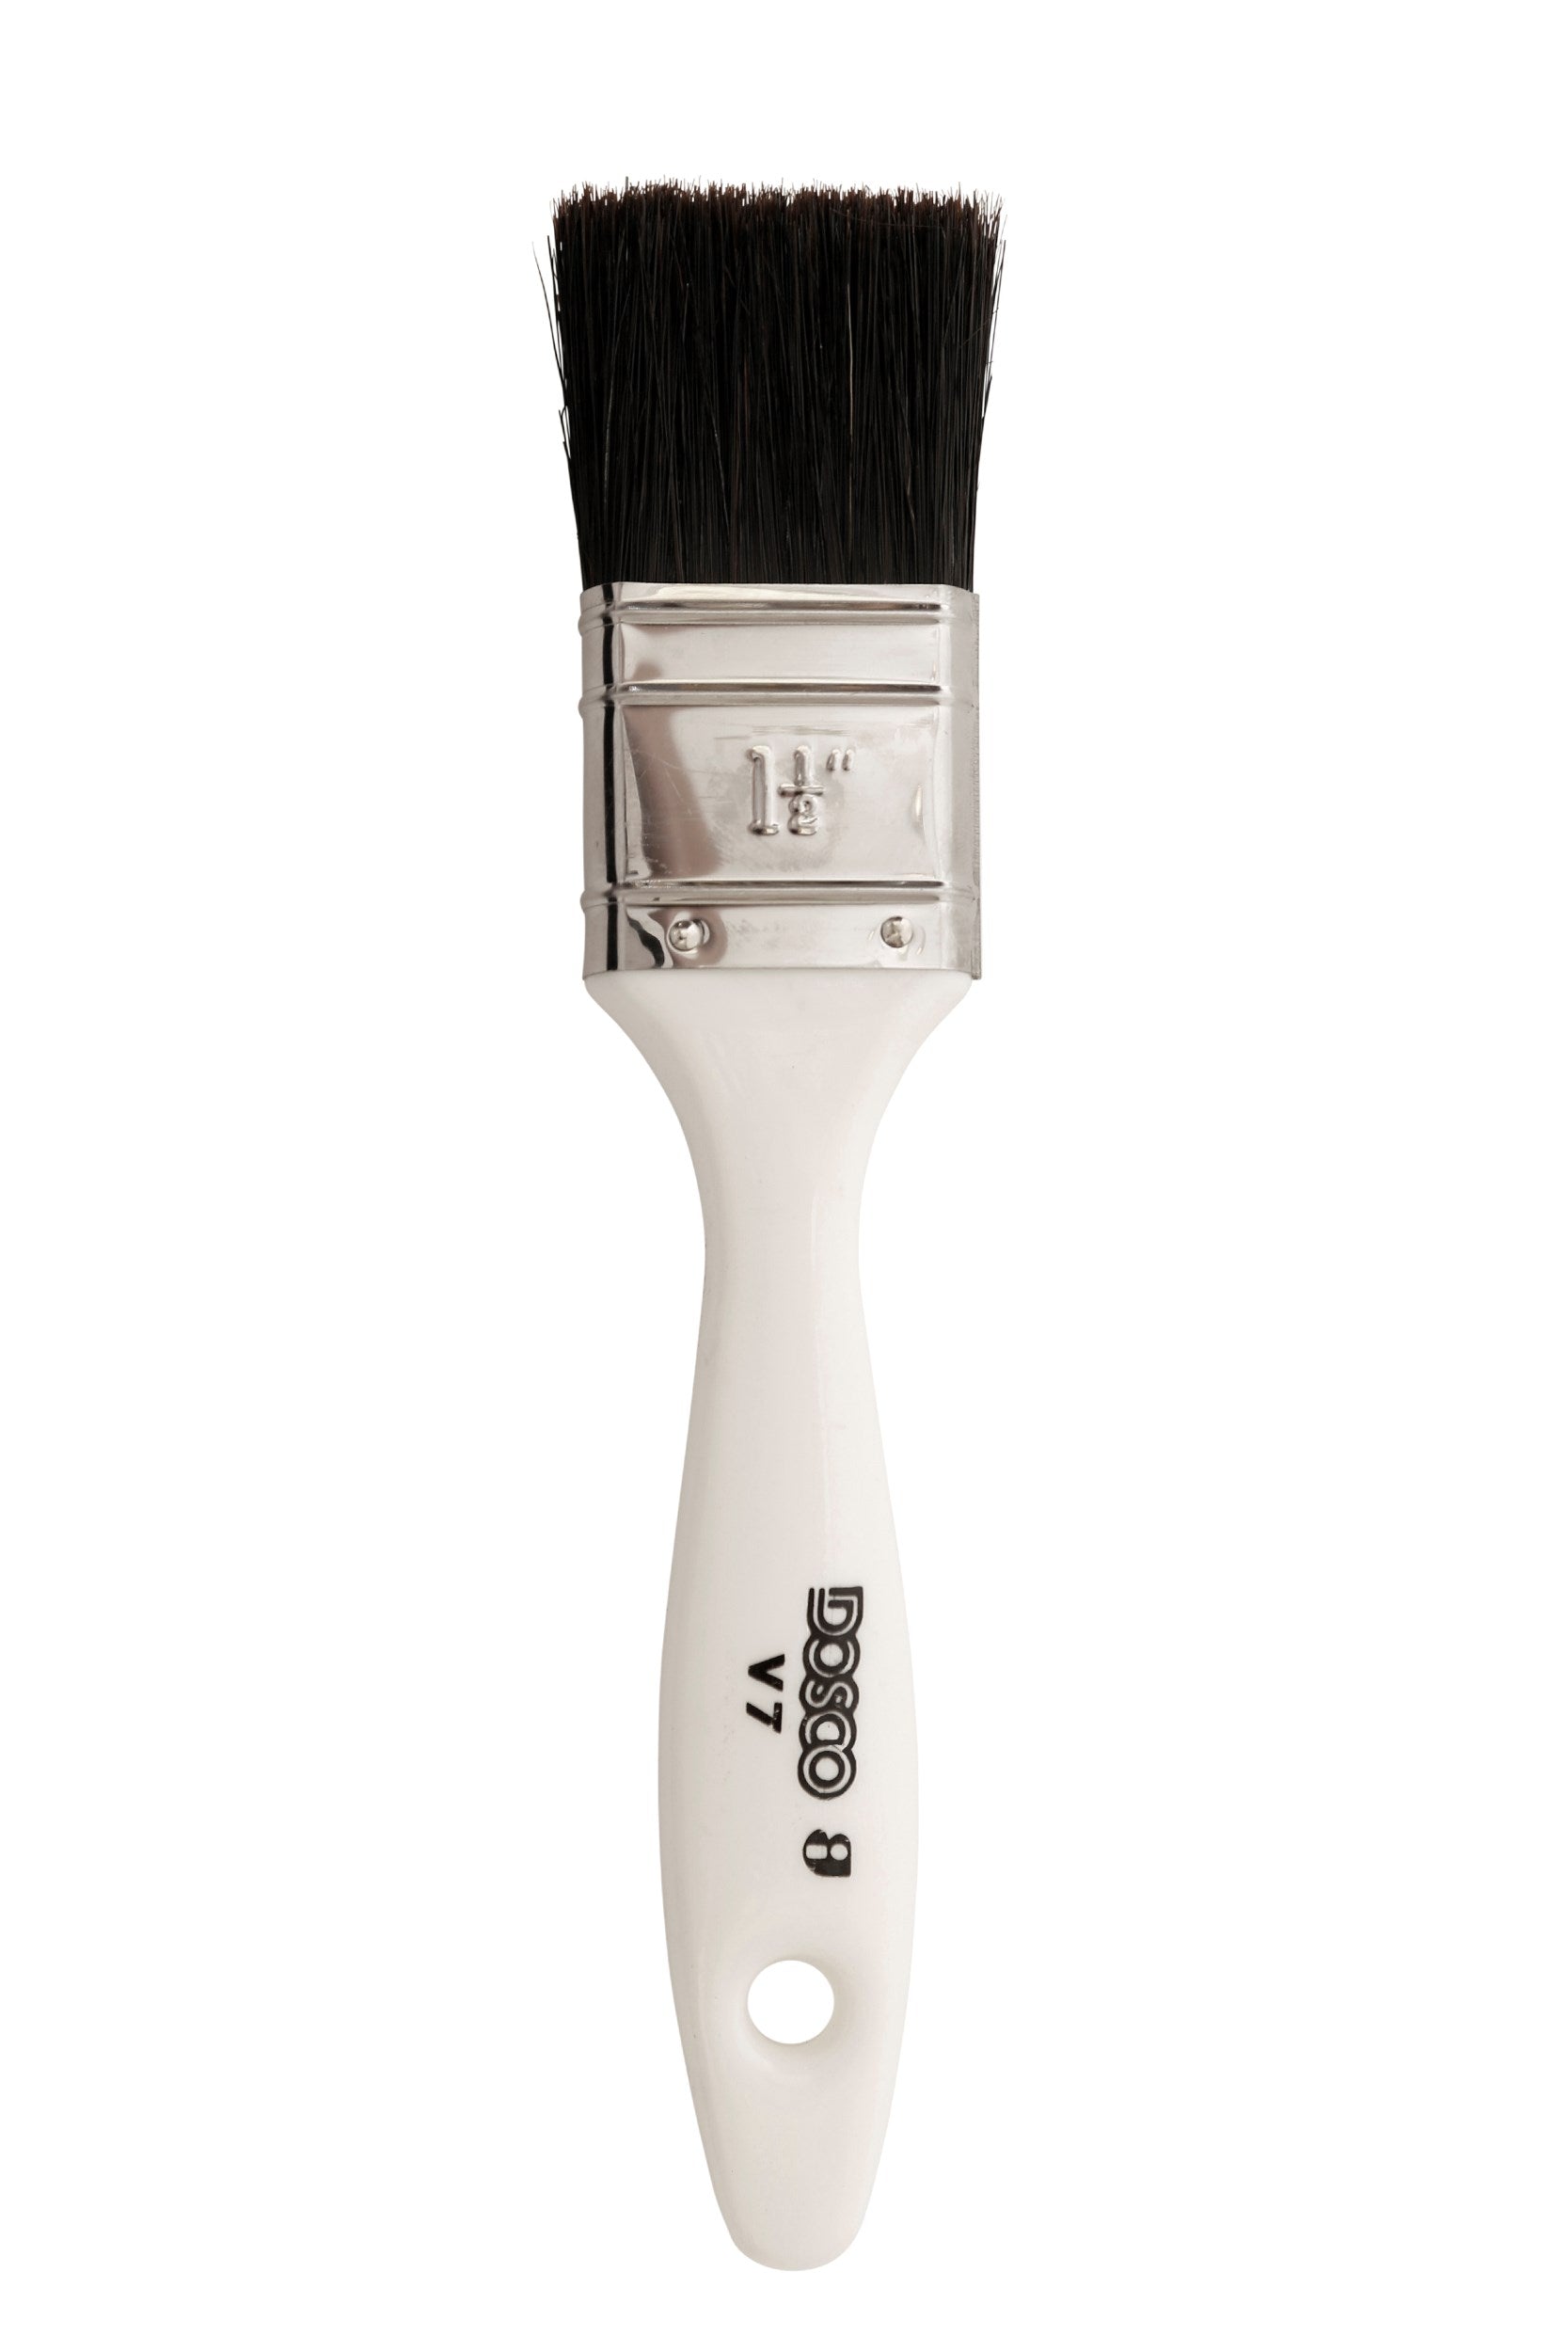 Paint & Decorating | DOSCO All Purpose V7 Paint Brush 1.5 inch by Weirs of Baggot St